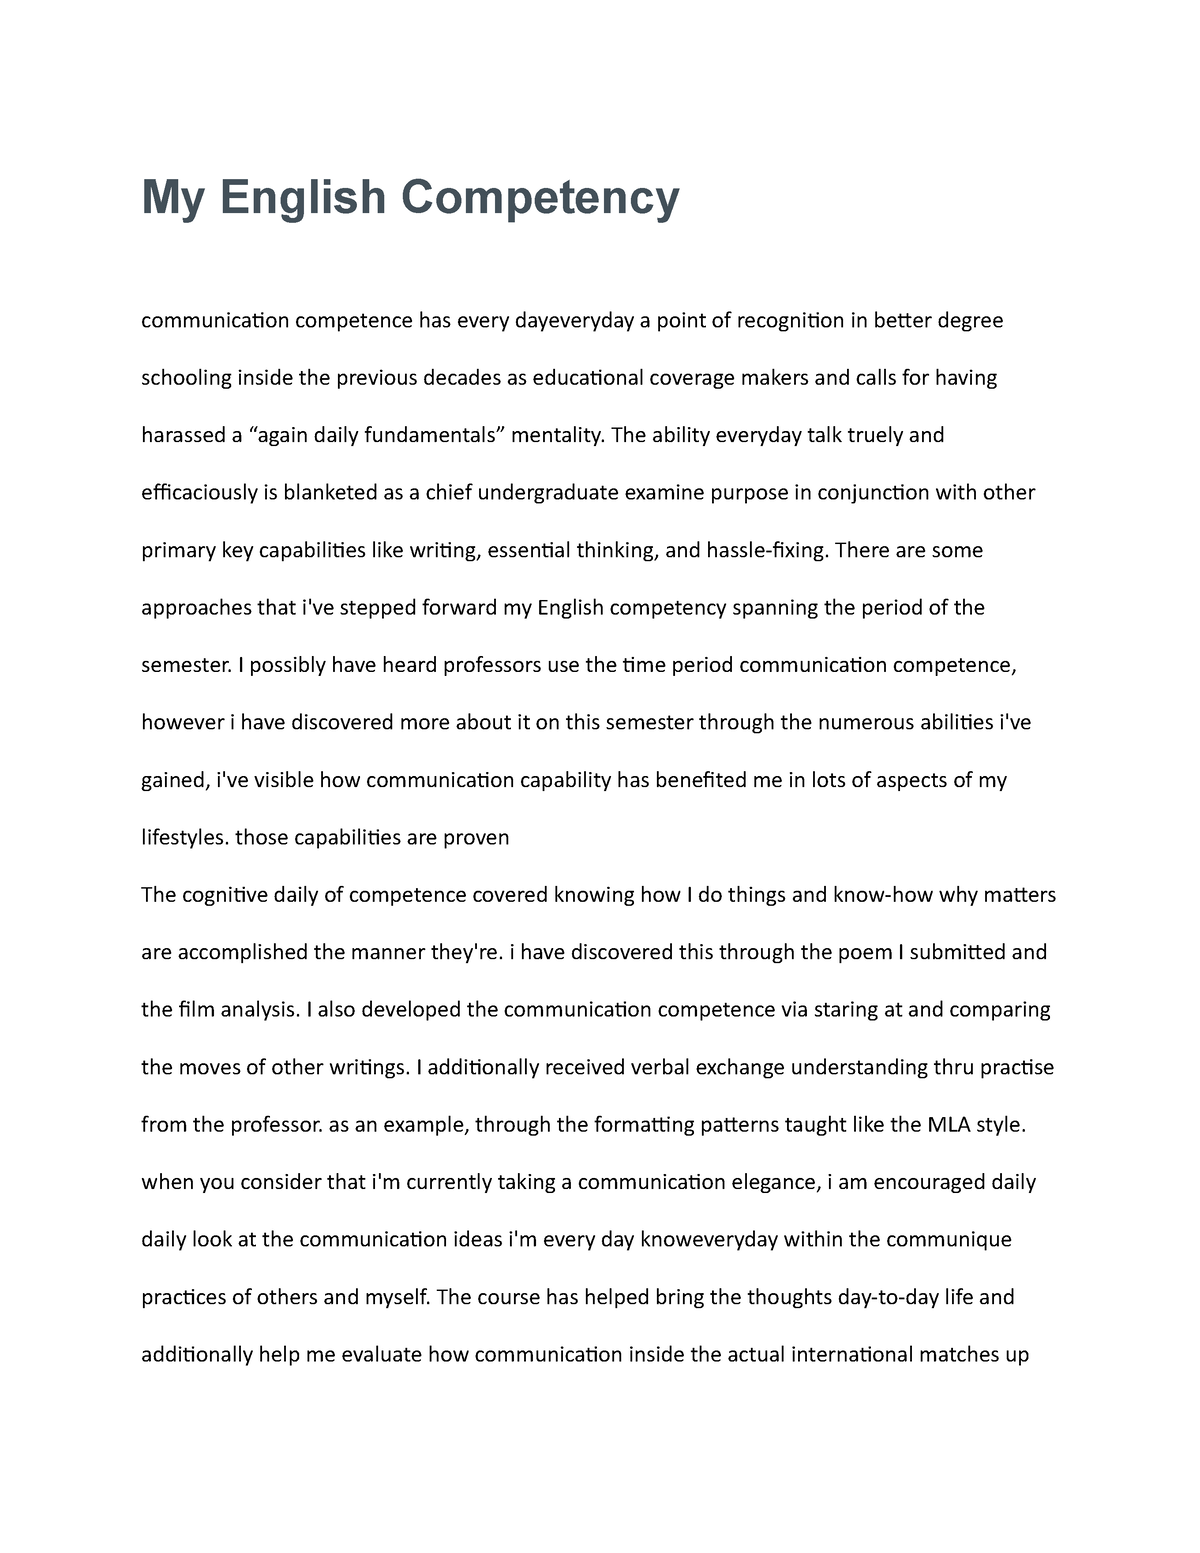 bcci competency essay writing guide